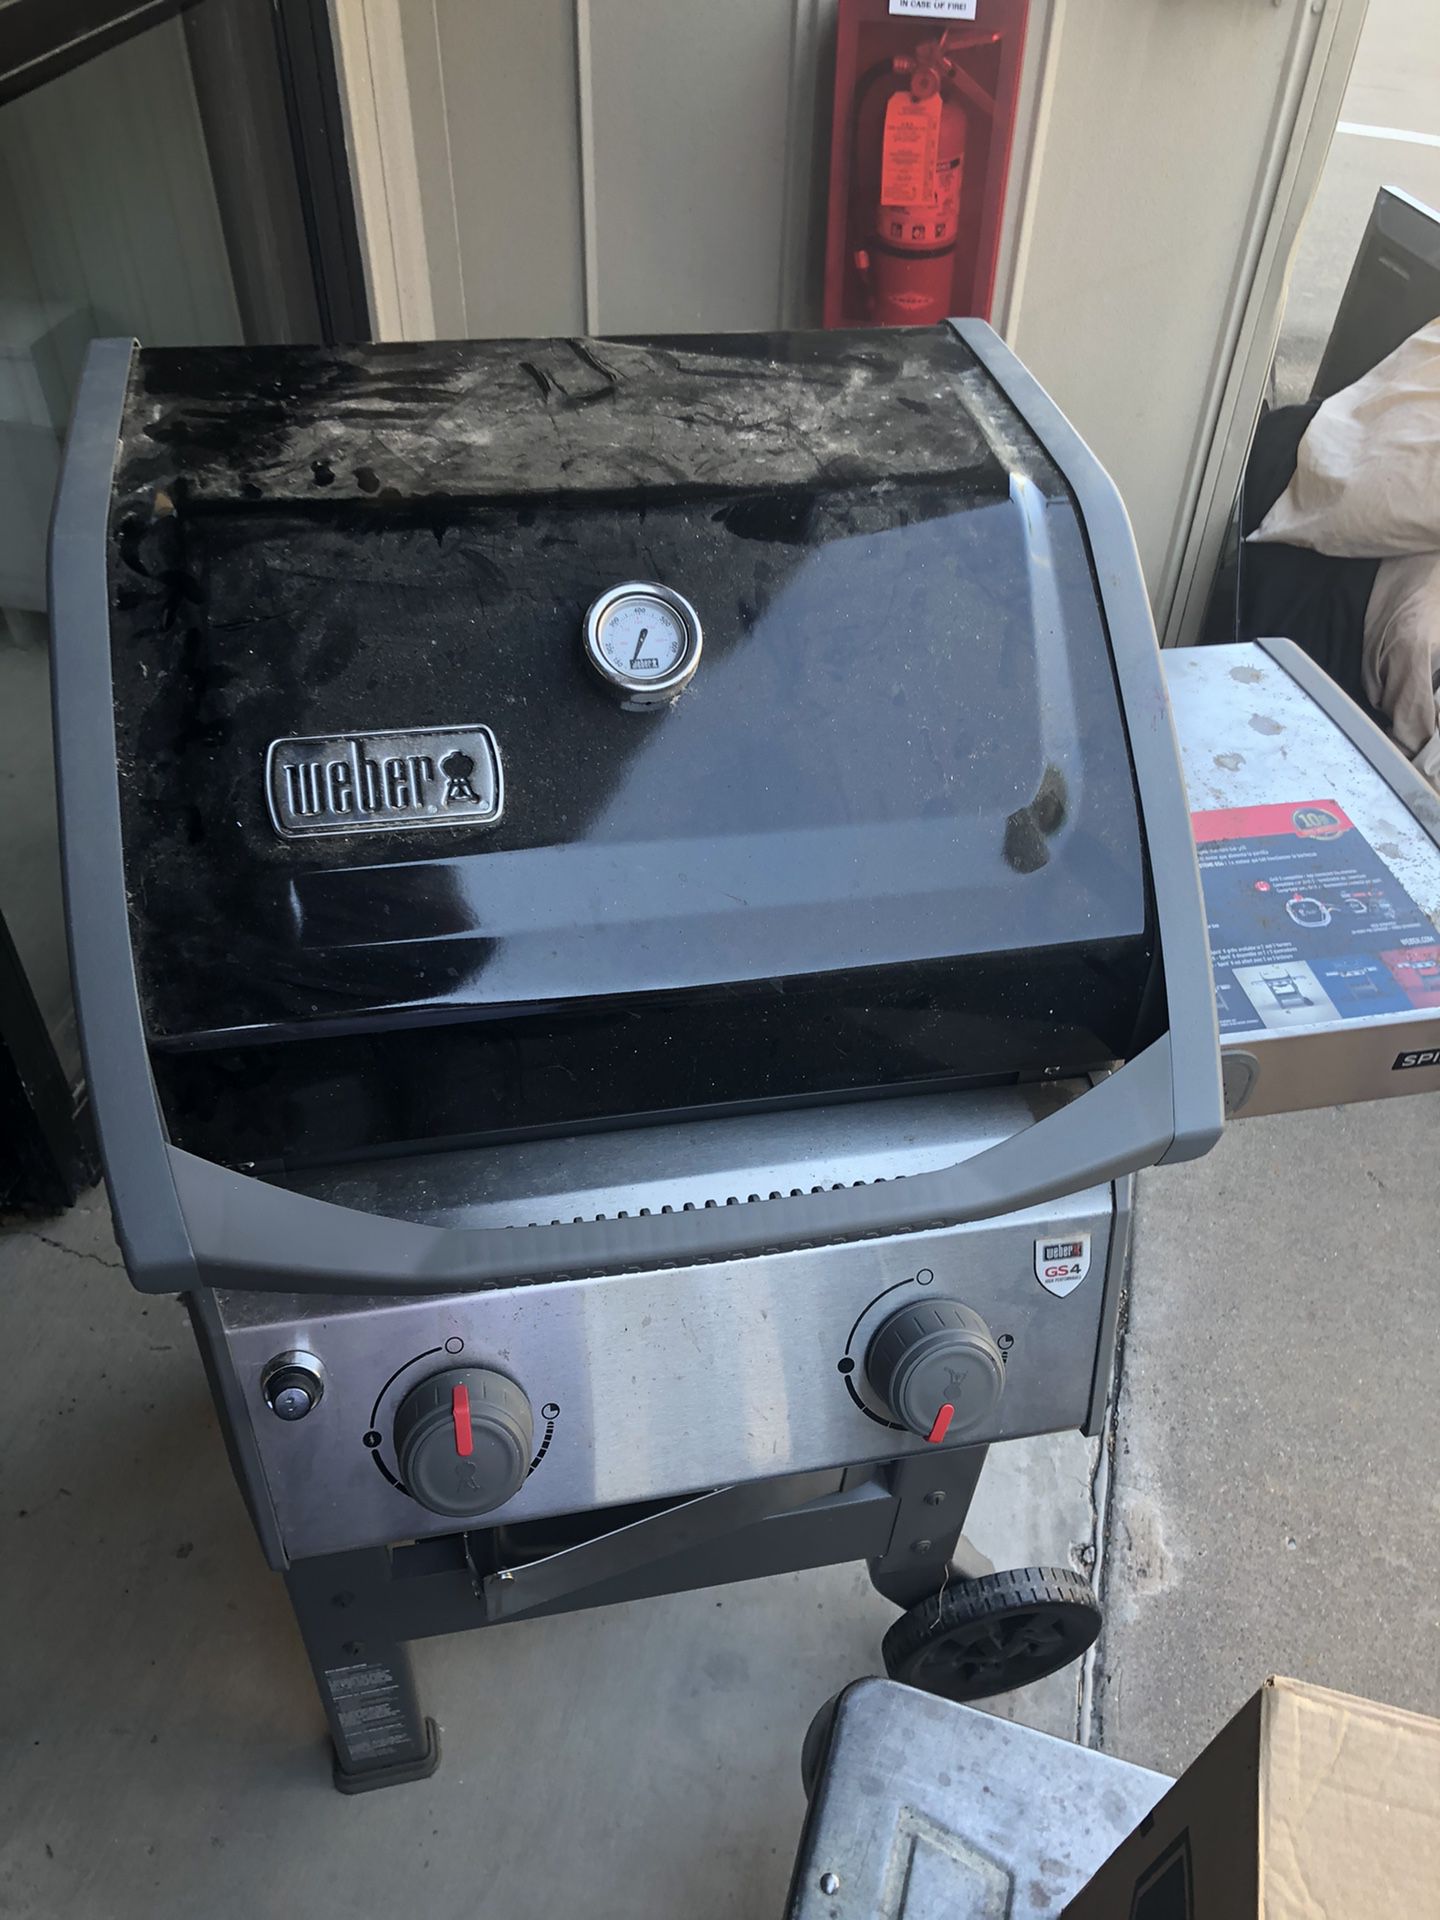 Weber gas grill with free propane tank